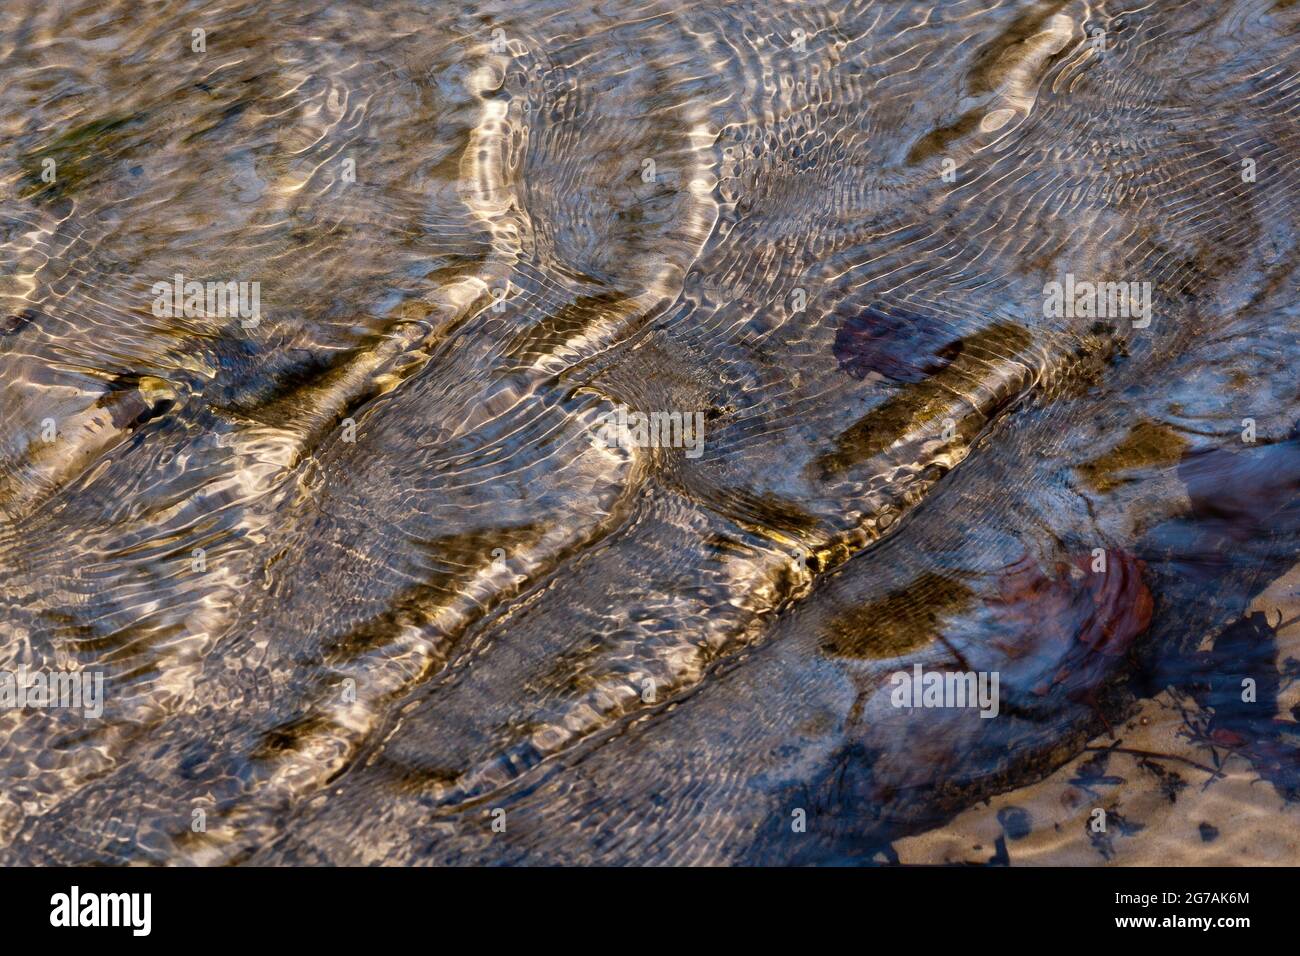 Ripple marks in a stream with reflections of sunlight in the water. Stock Photo